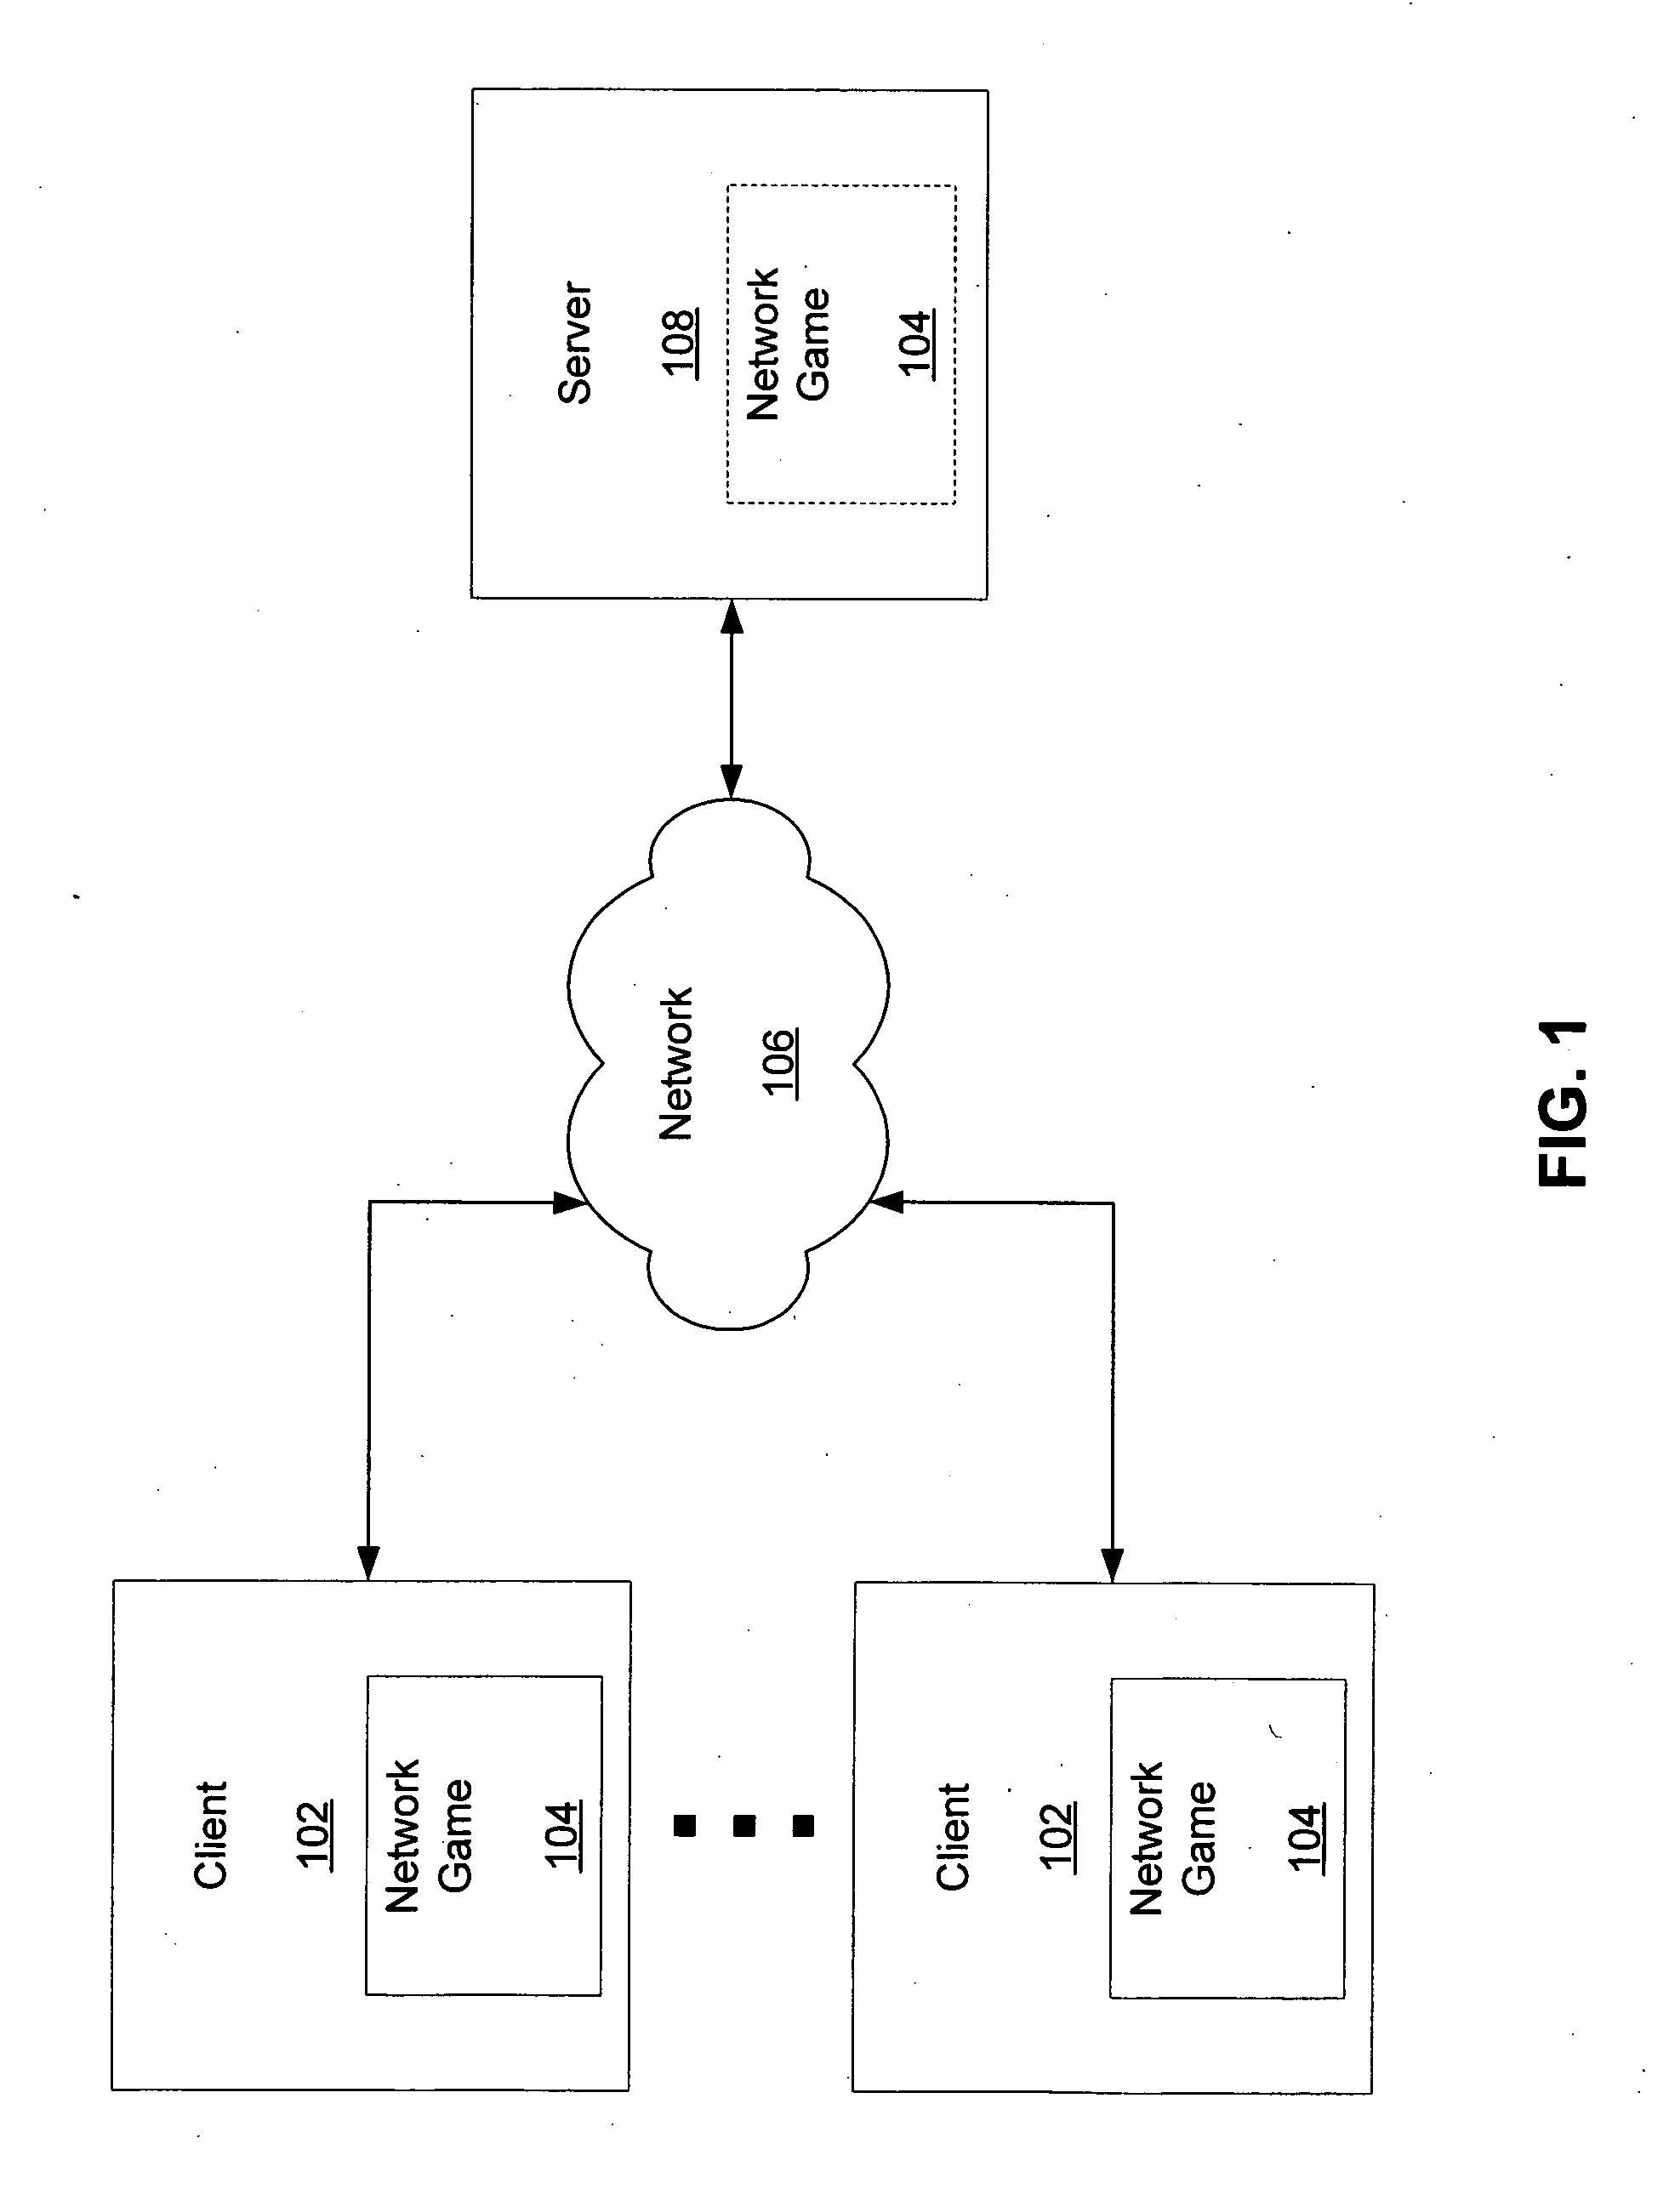 Active validation of network devices